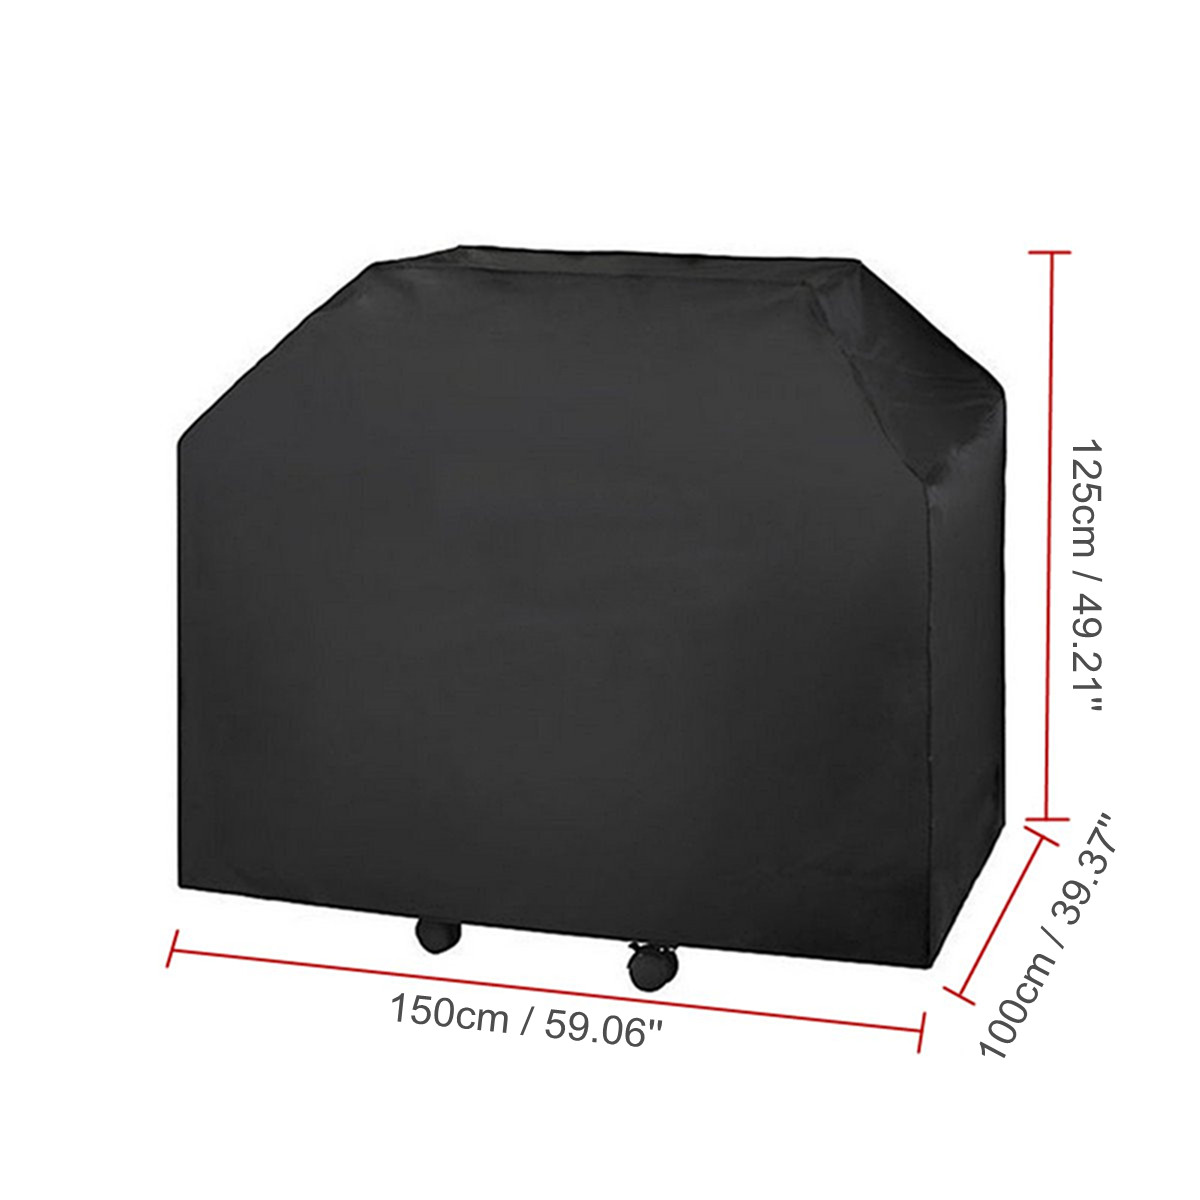 59-Inch-BBQ-Grill-Barbecue-Waterproof-Cover-Heavy-Duty-UV-Protector-Outdoor-Yard-Camping-1352191-2